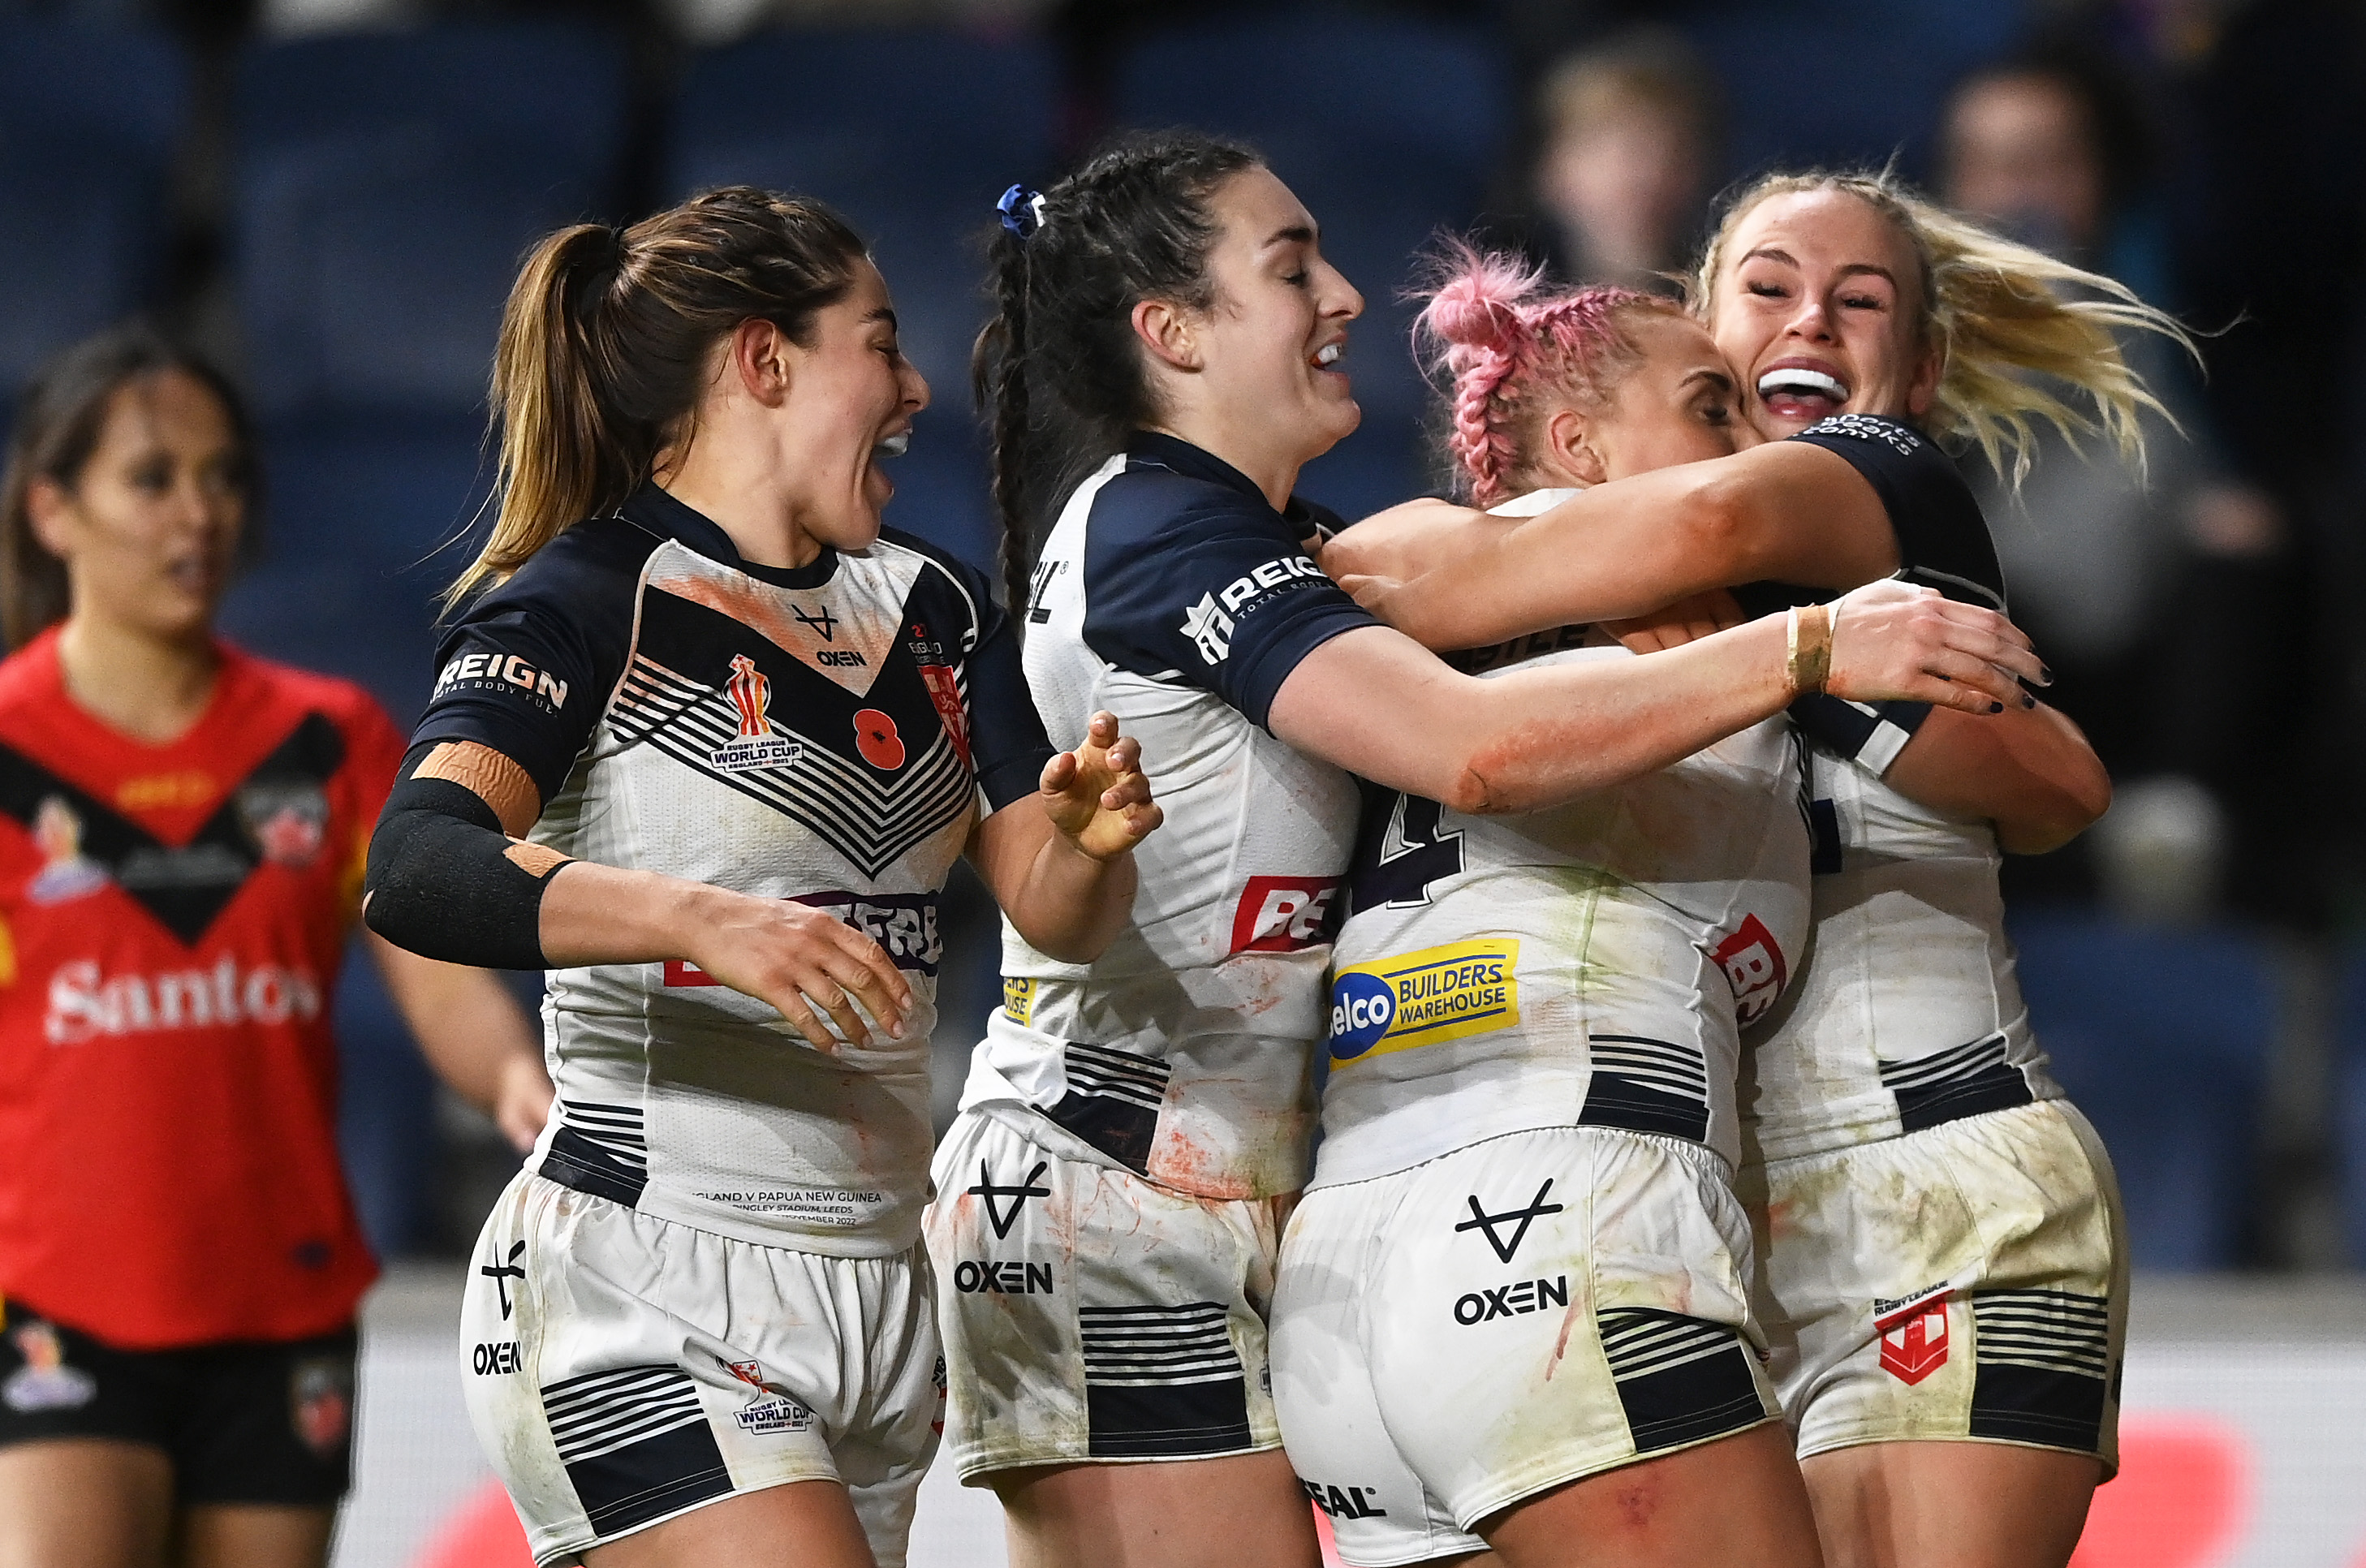 When is Englands Womens Rugby League semi-final against New Zealand?